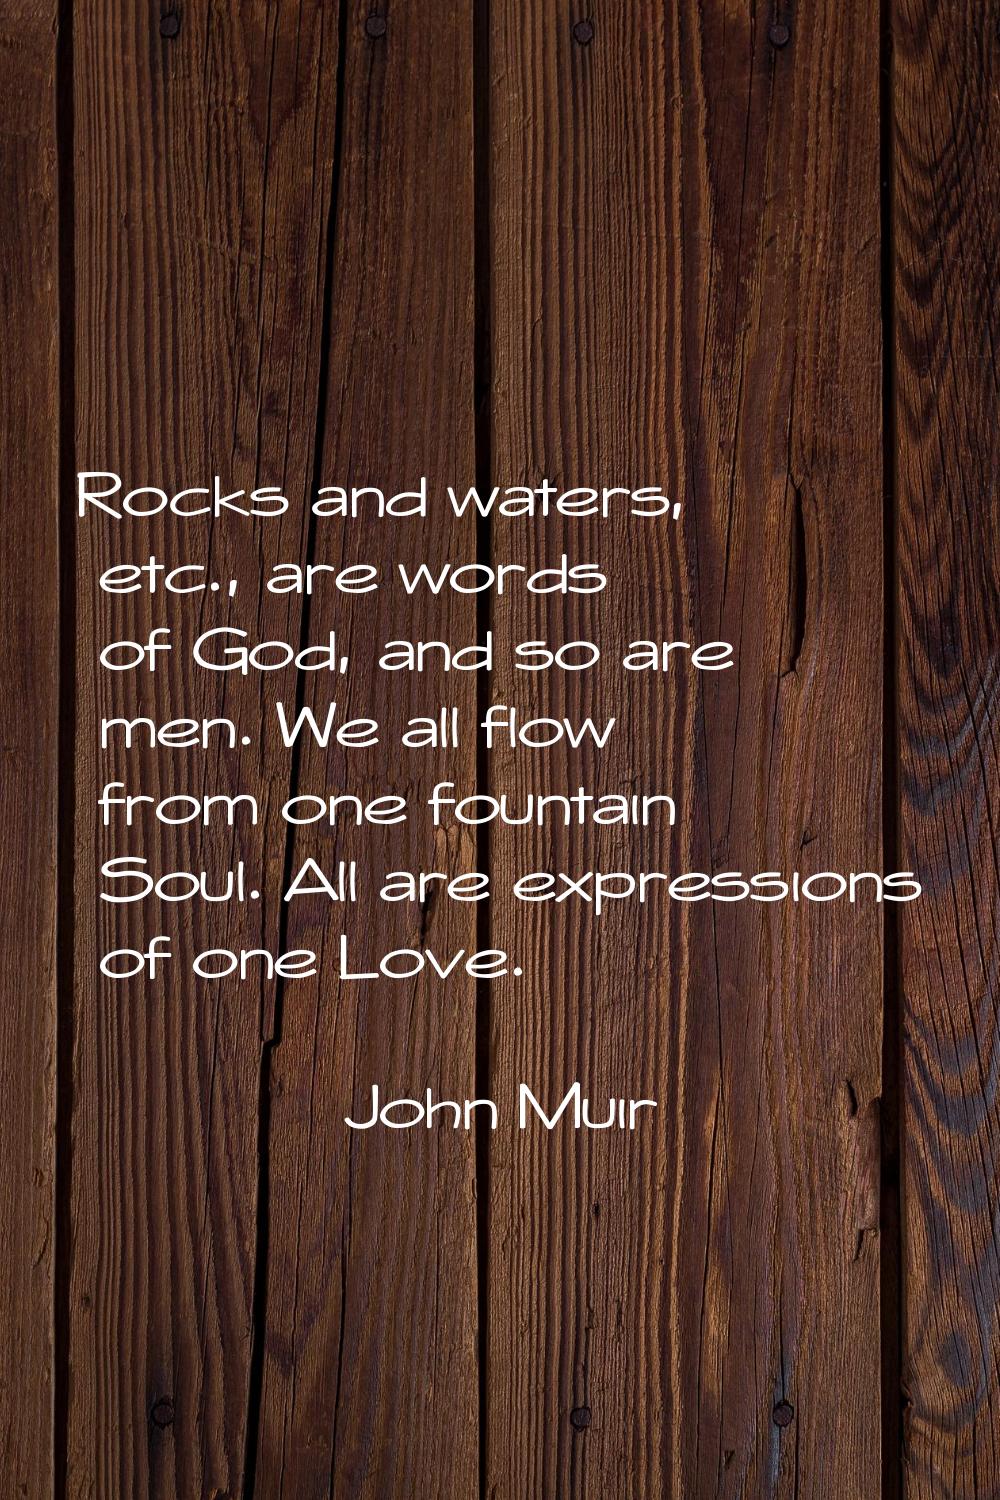 Rocks and waters, etc., are words of God, and so are men. We all flow from one fountain Soul. All a